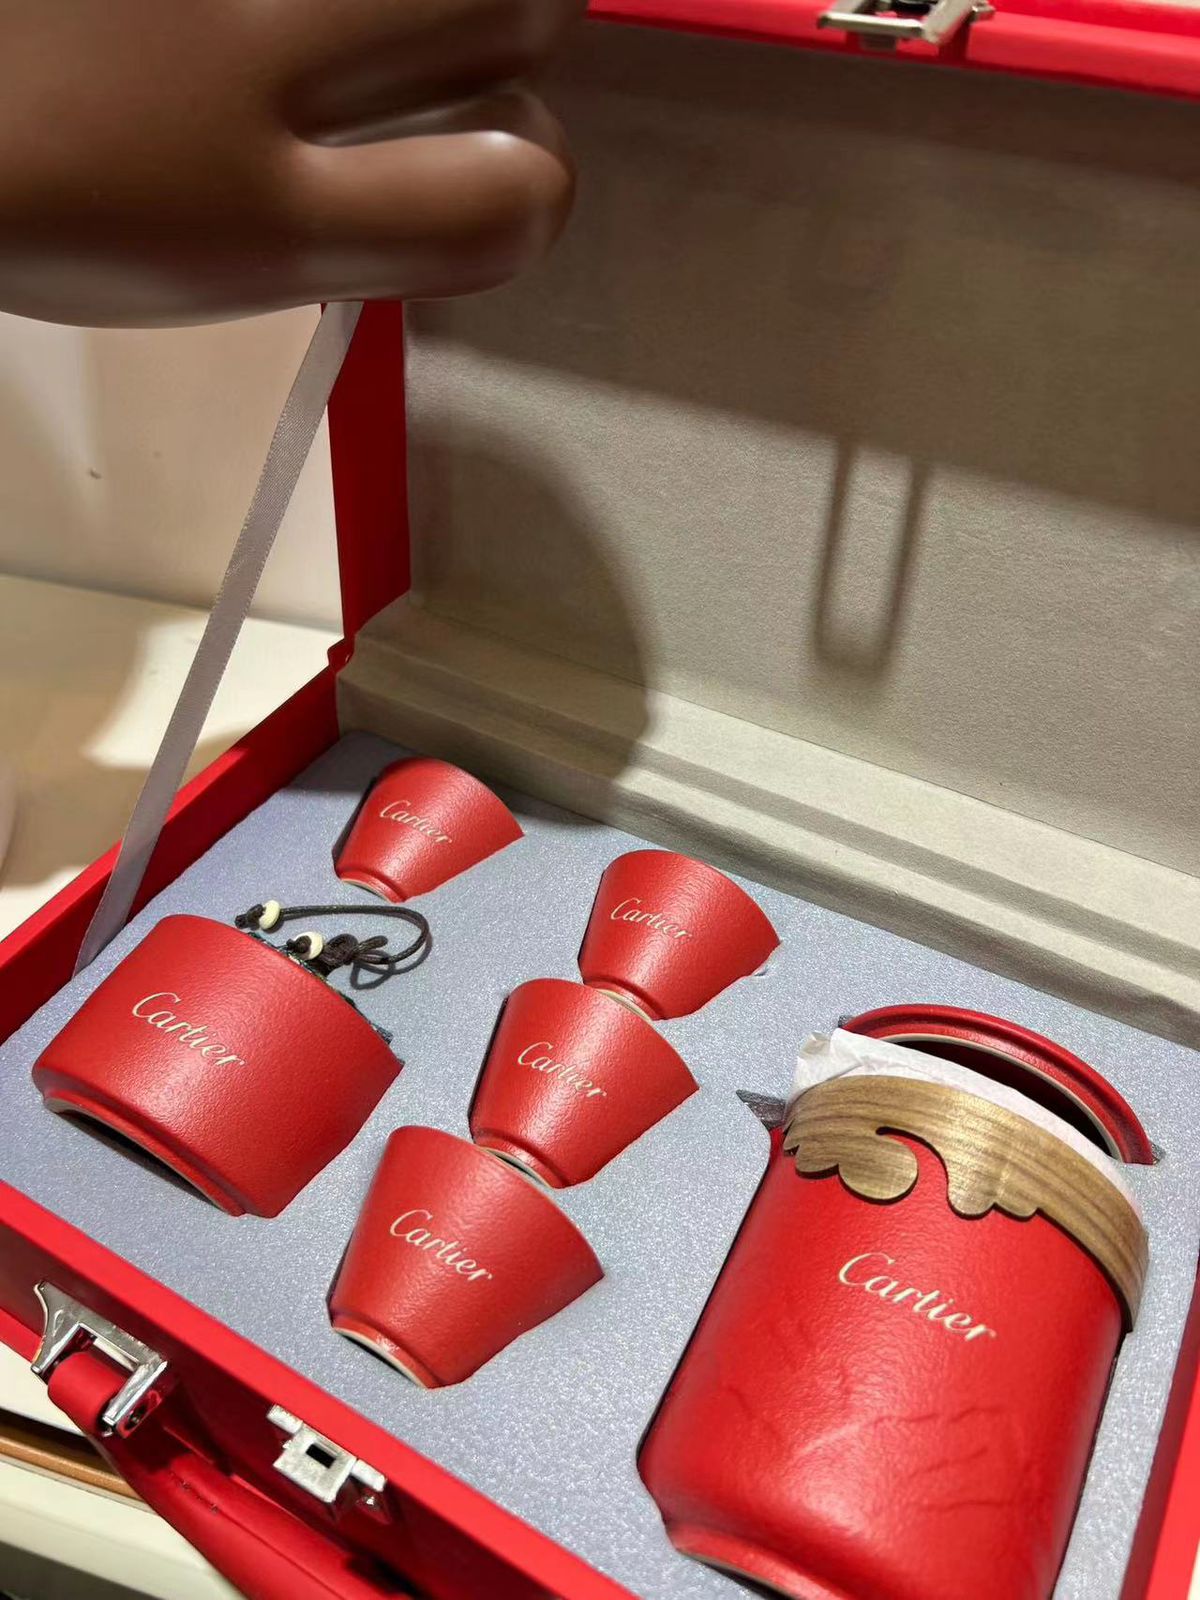 Cartier Turkish or Espresso coffee set of seven pieces for four people